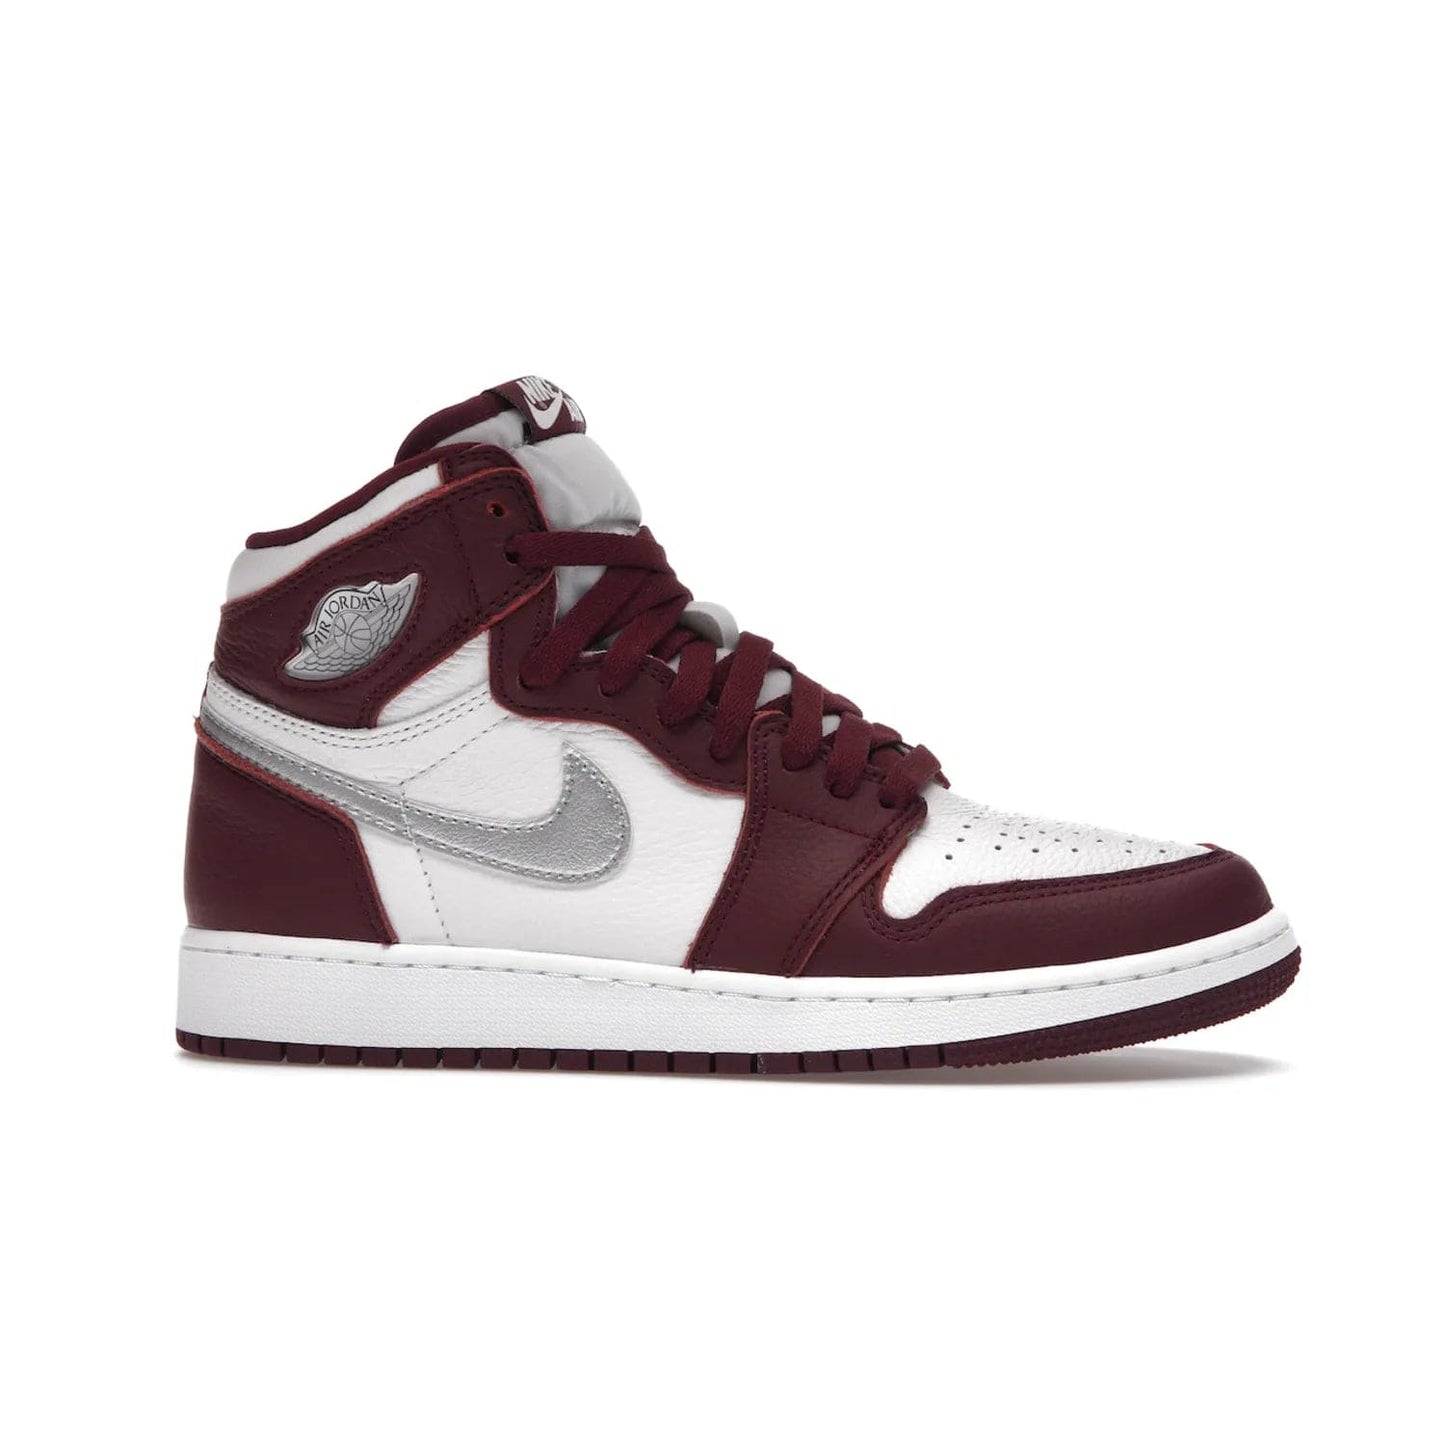 Jordan 1 Retro High OG Bordeaux (GS) - Image 2 - Only at www.BallersClubKickz.com - #
Introducing the Air Jordan 1 Retro High OG Bordeaux GS – a signature colorway part of the Jordan Brand Fall 2021 lineup. White leather upper & Bordeaux overlays, metallic silver swoosh, jeweled Air Jordan Wings logo & more. Step up your style game with this sleek fall season silhouette.